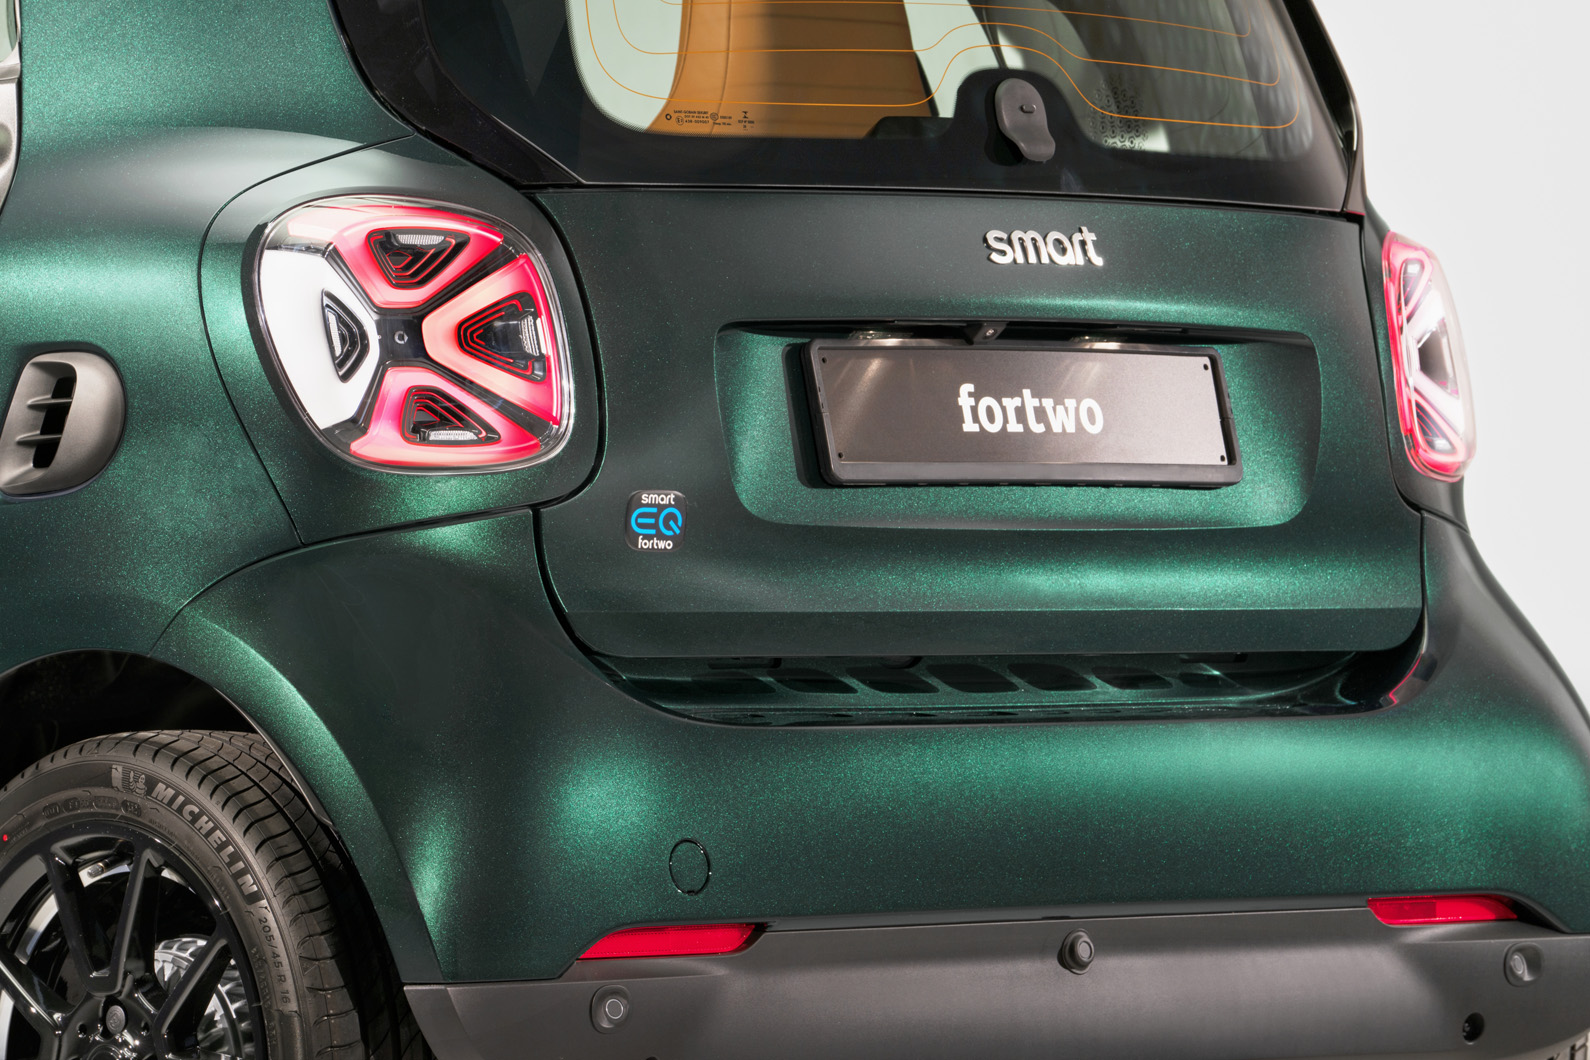 2022 Smart EQ ForTwo Racing Green Edition: Brabus-badged electric